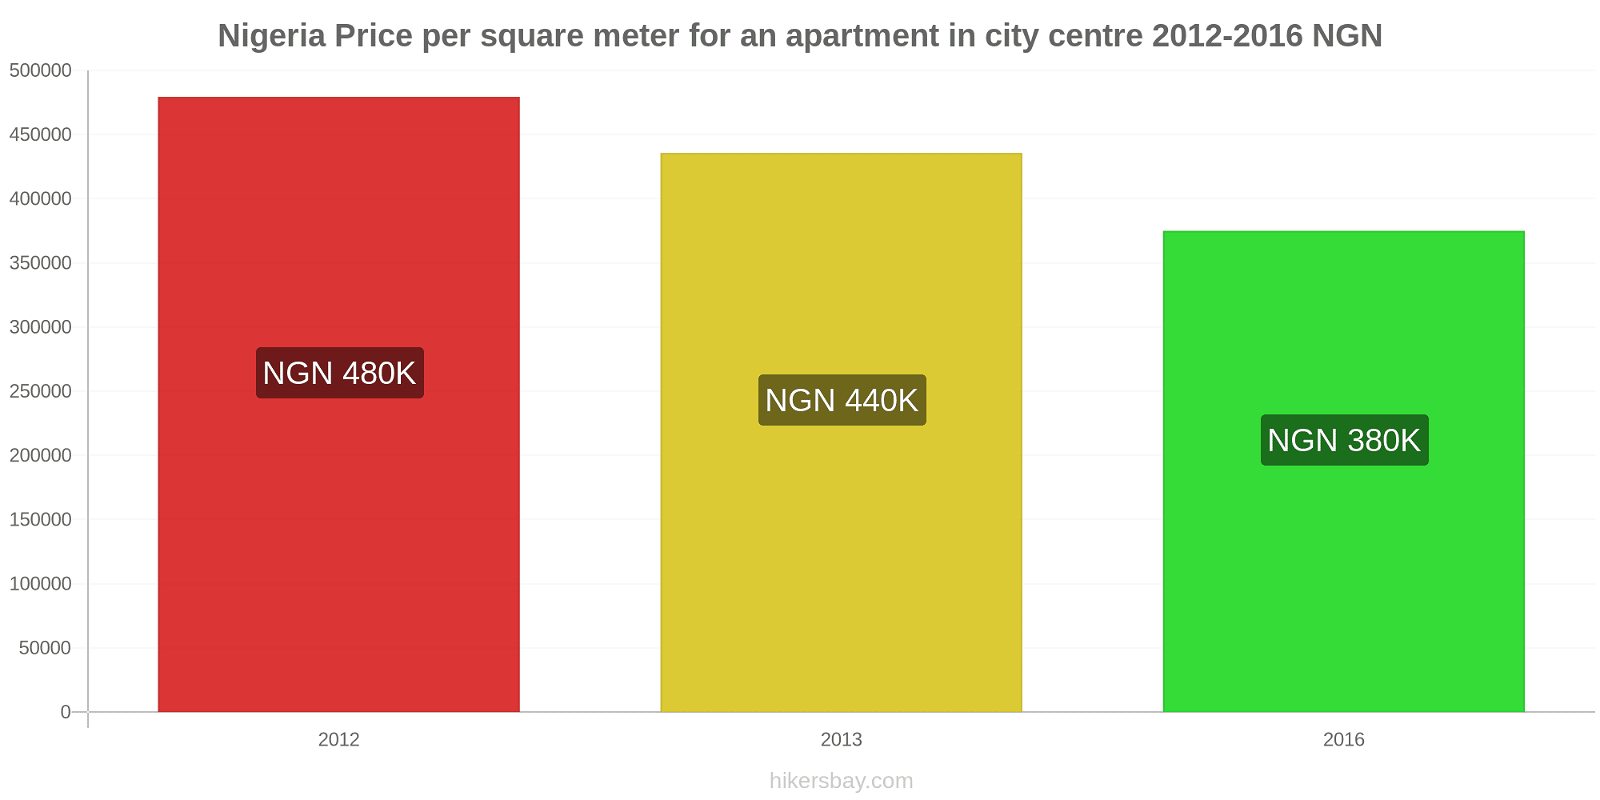 Nigeria price changes Price per square meter for an apartment in the city center hikersbay.com